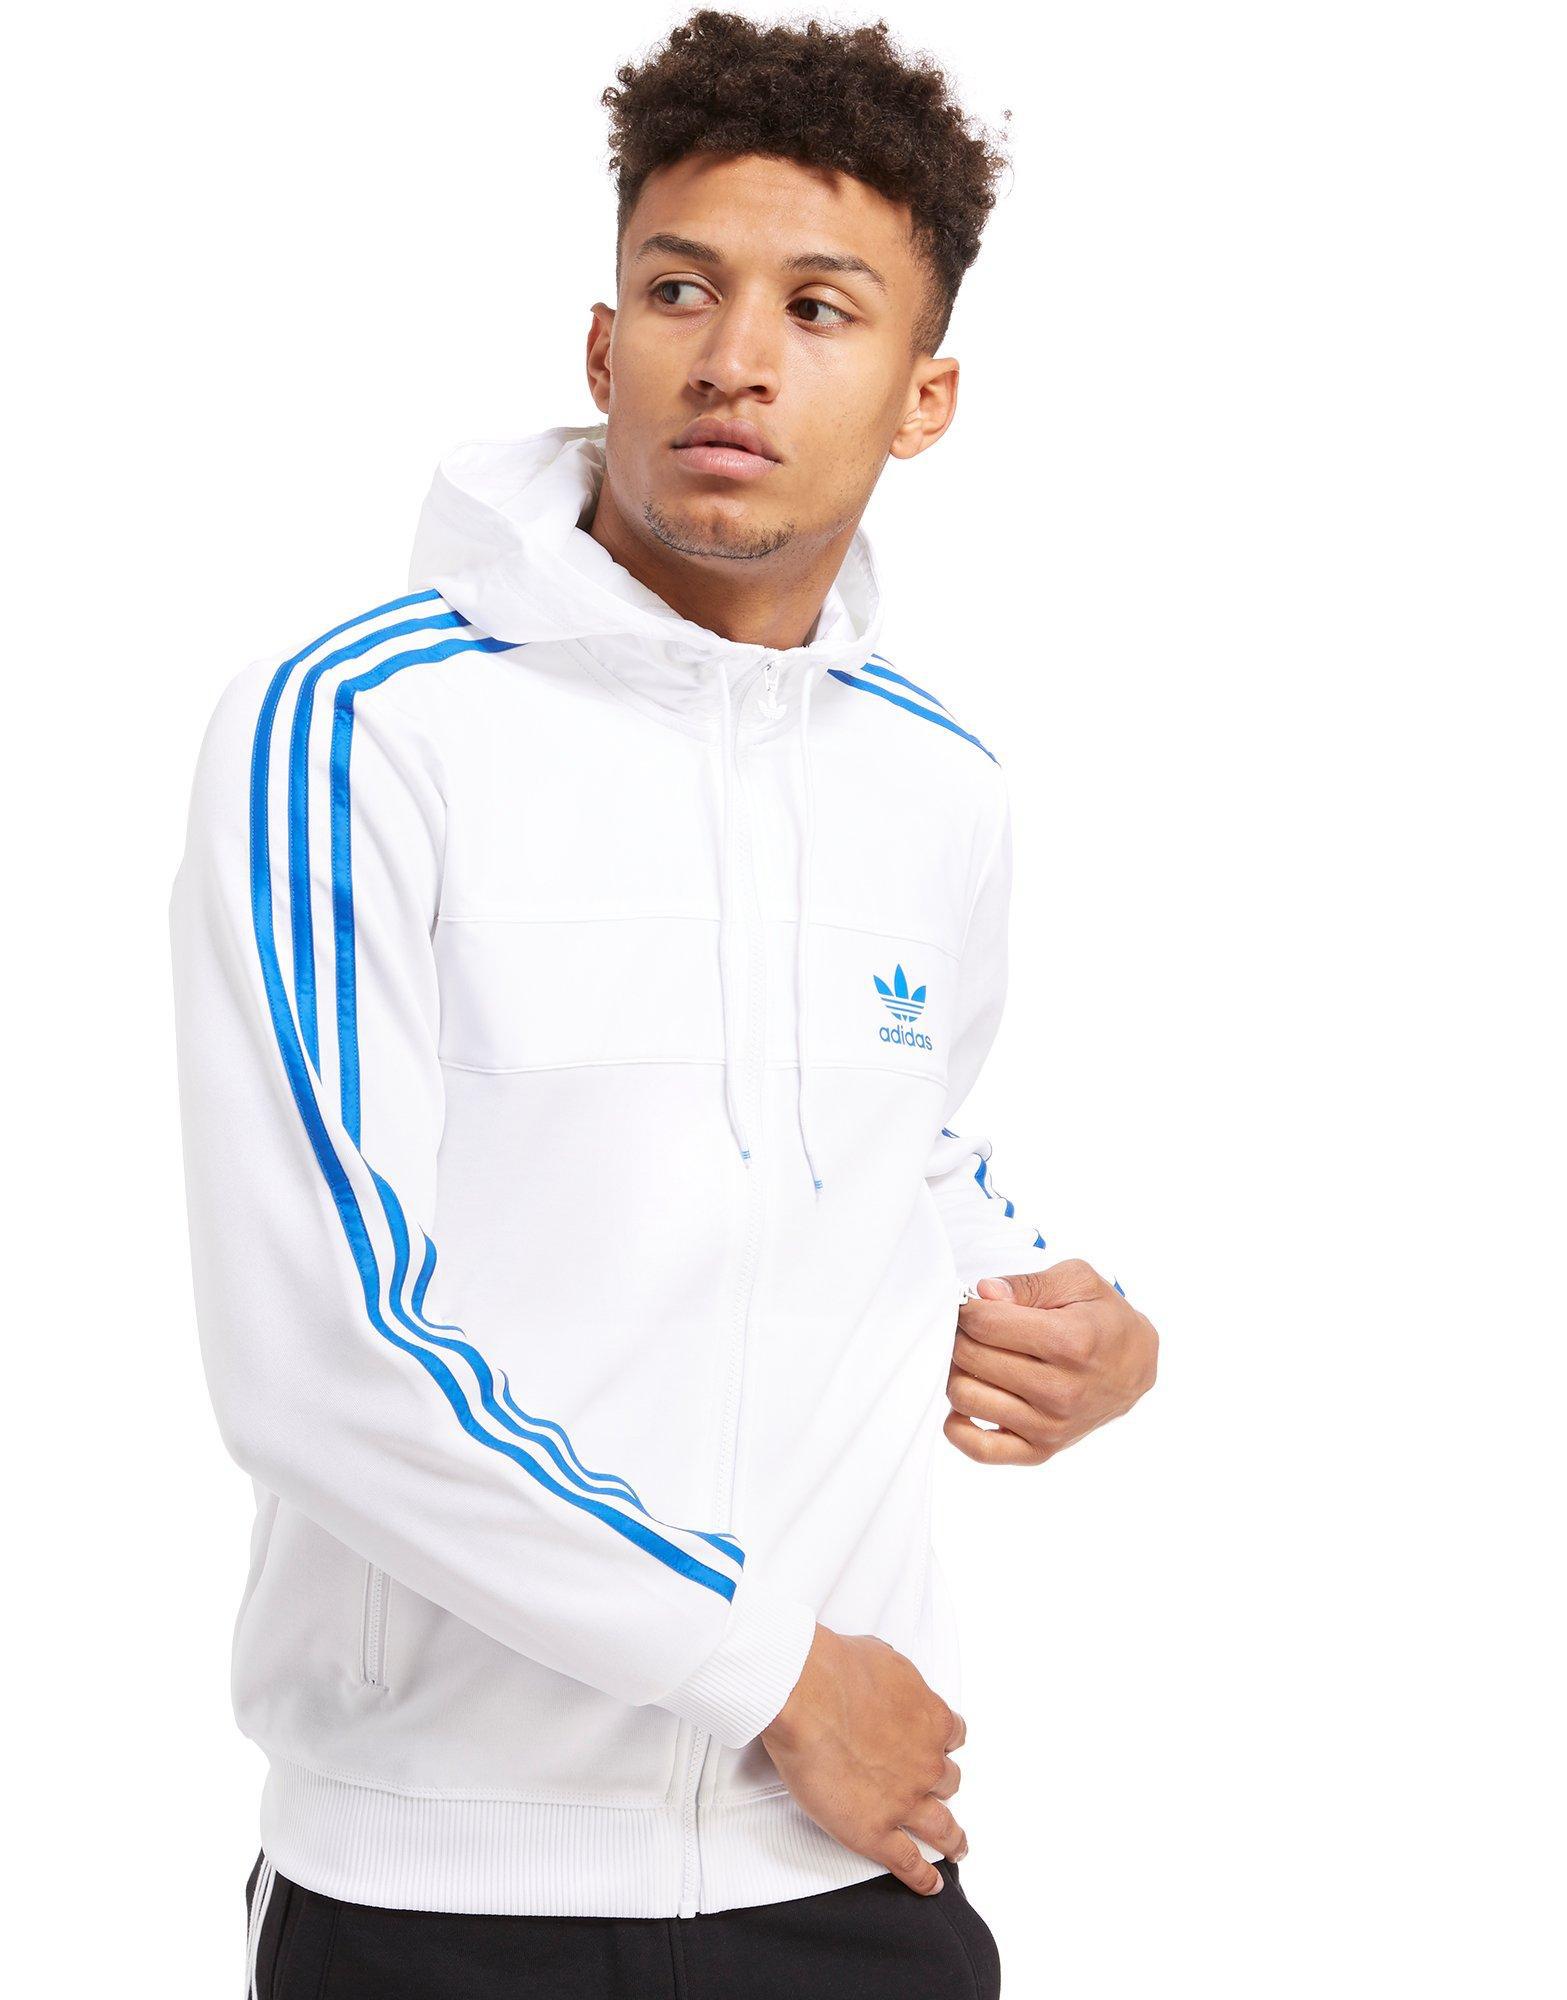 adidas Originals Cotton Country Full Zip Hoody in White/Blue (White) for  Men - Lyst